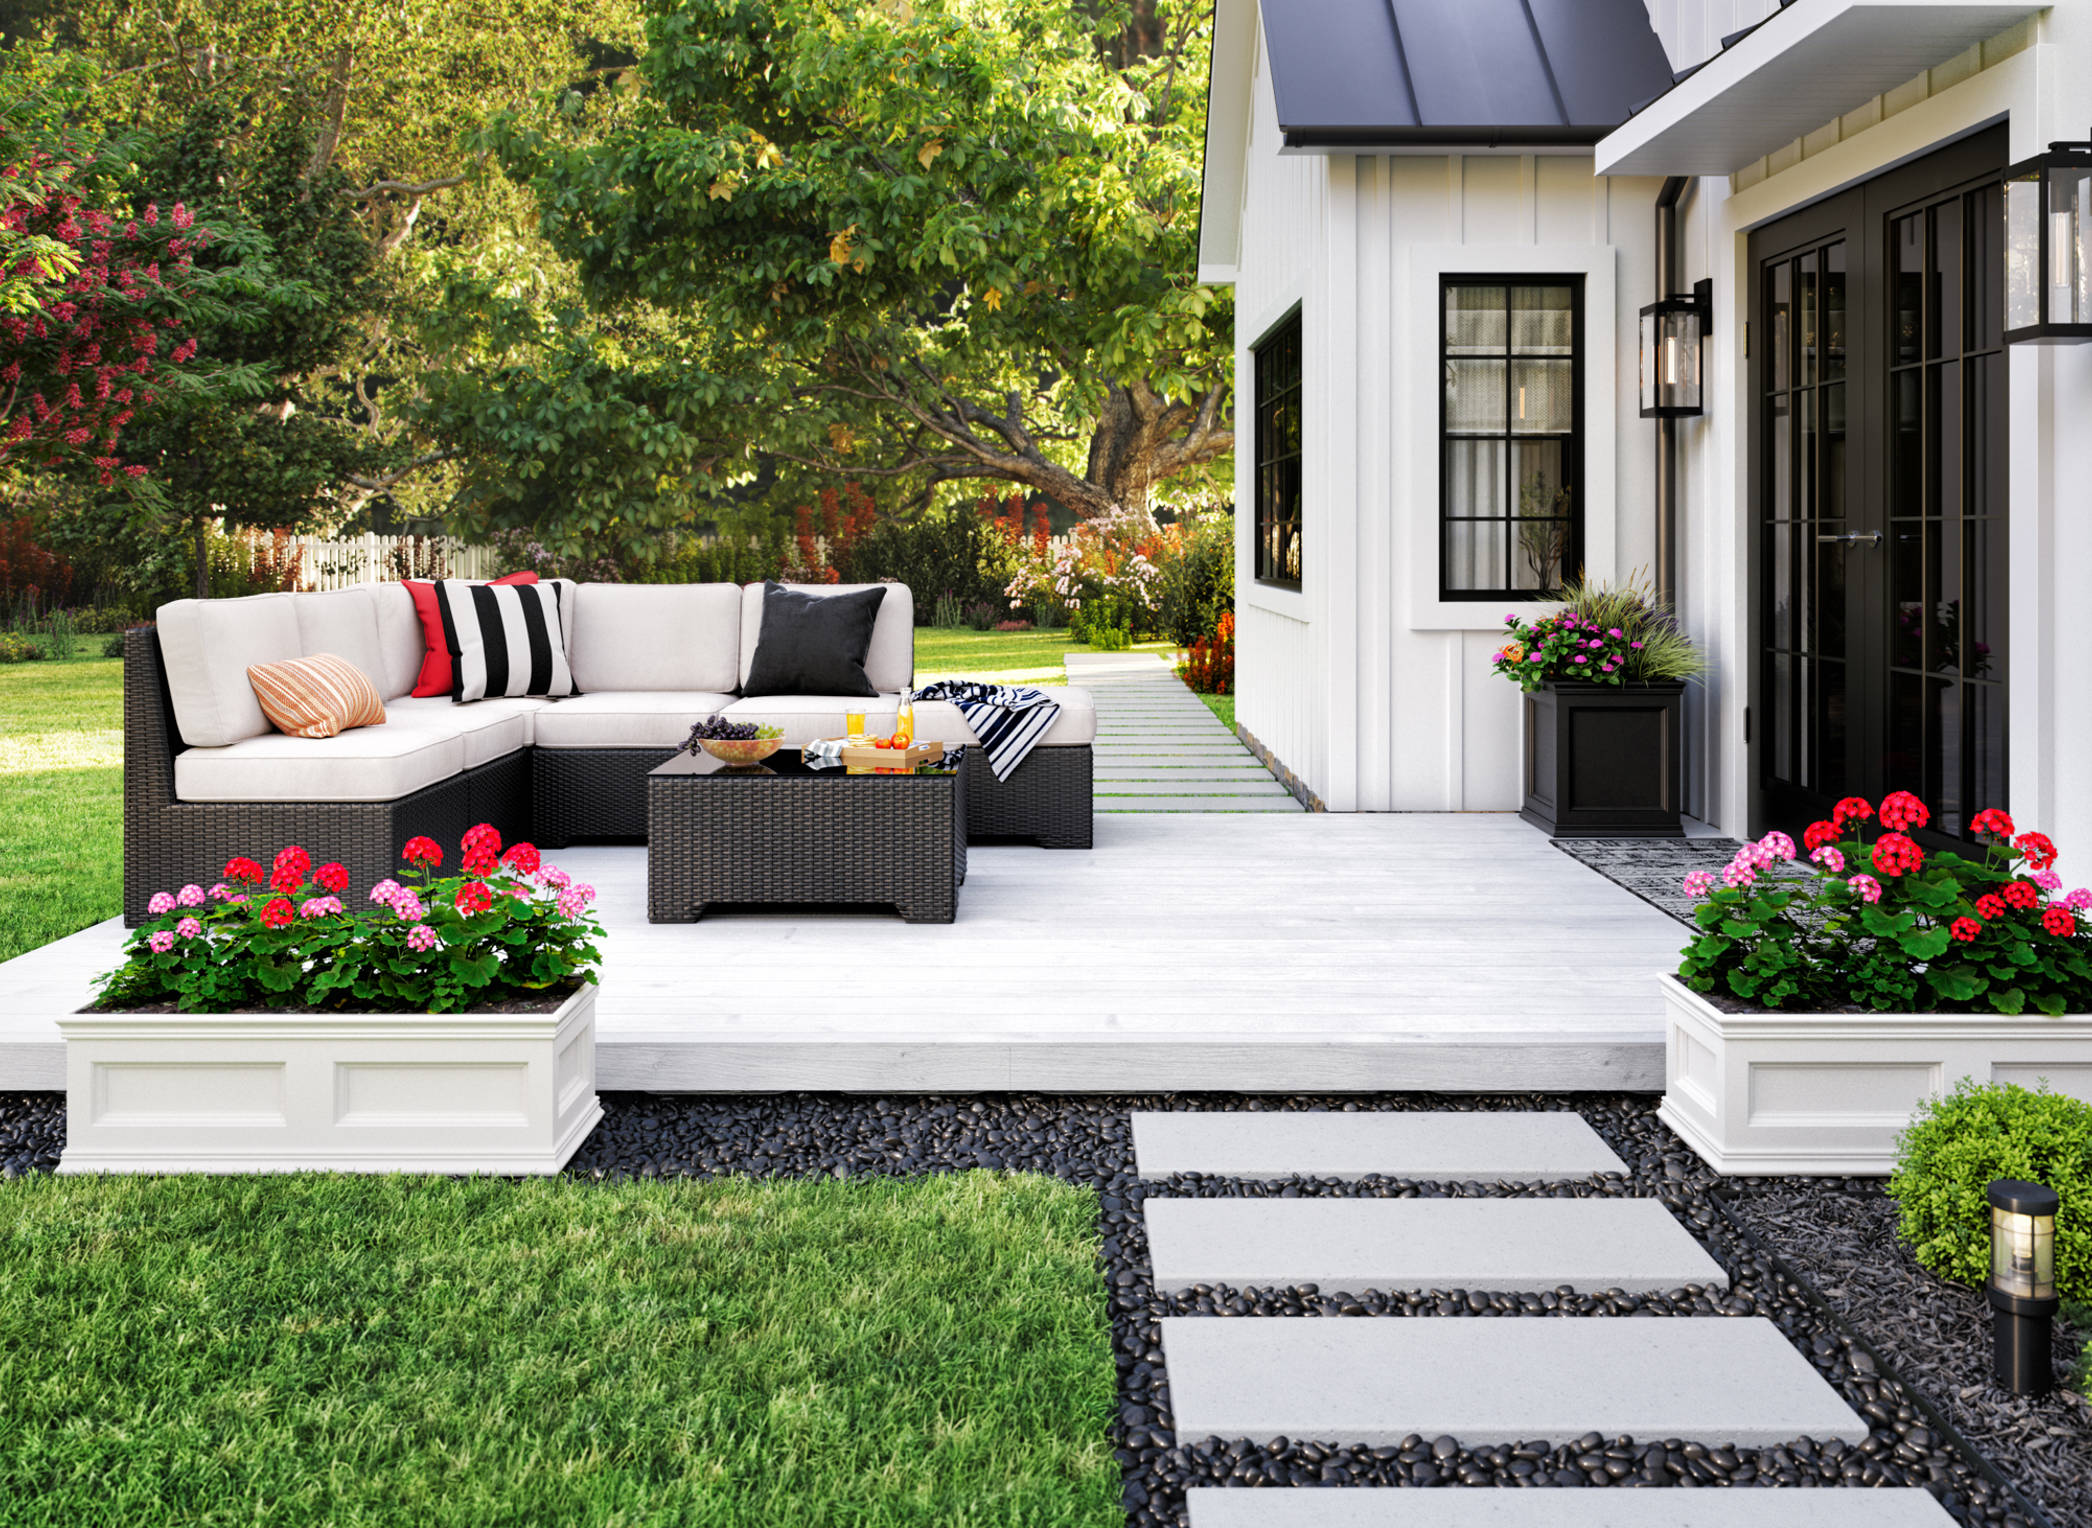 The image above shows an outdoor patio attached to a white house. The white deck holds a sofa and table. It sits atop gravel surrounded by grass. 